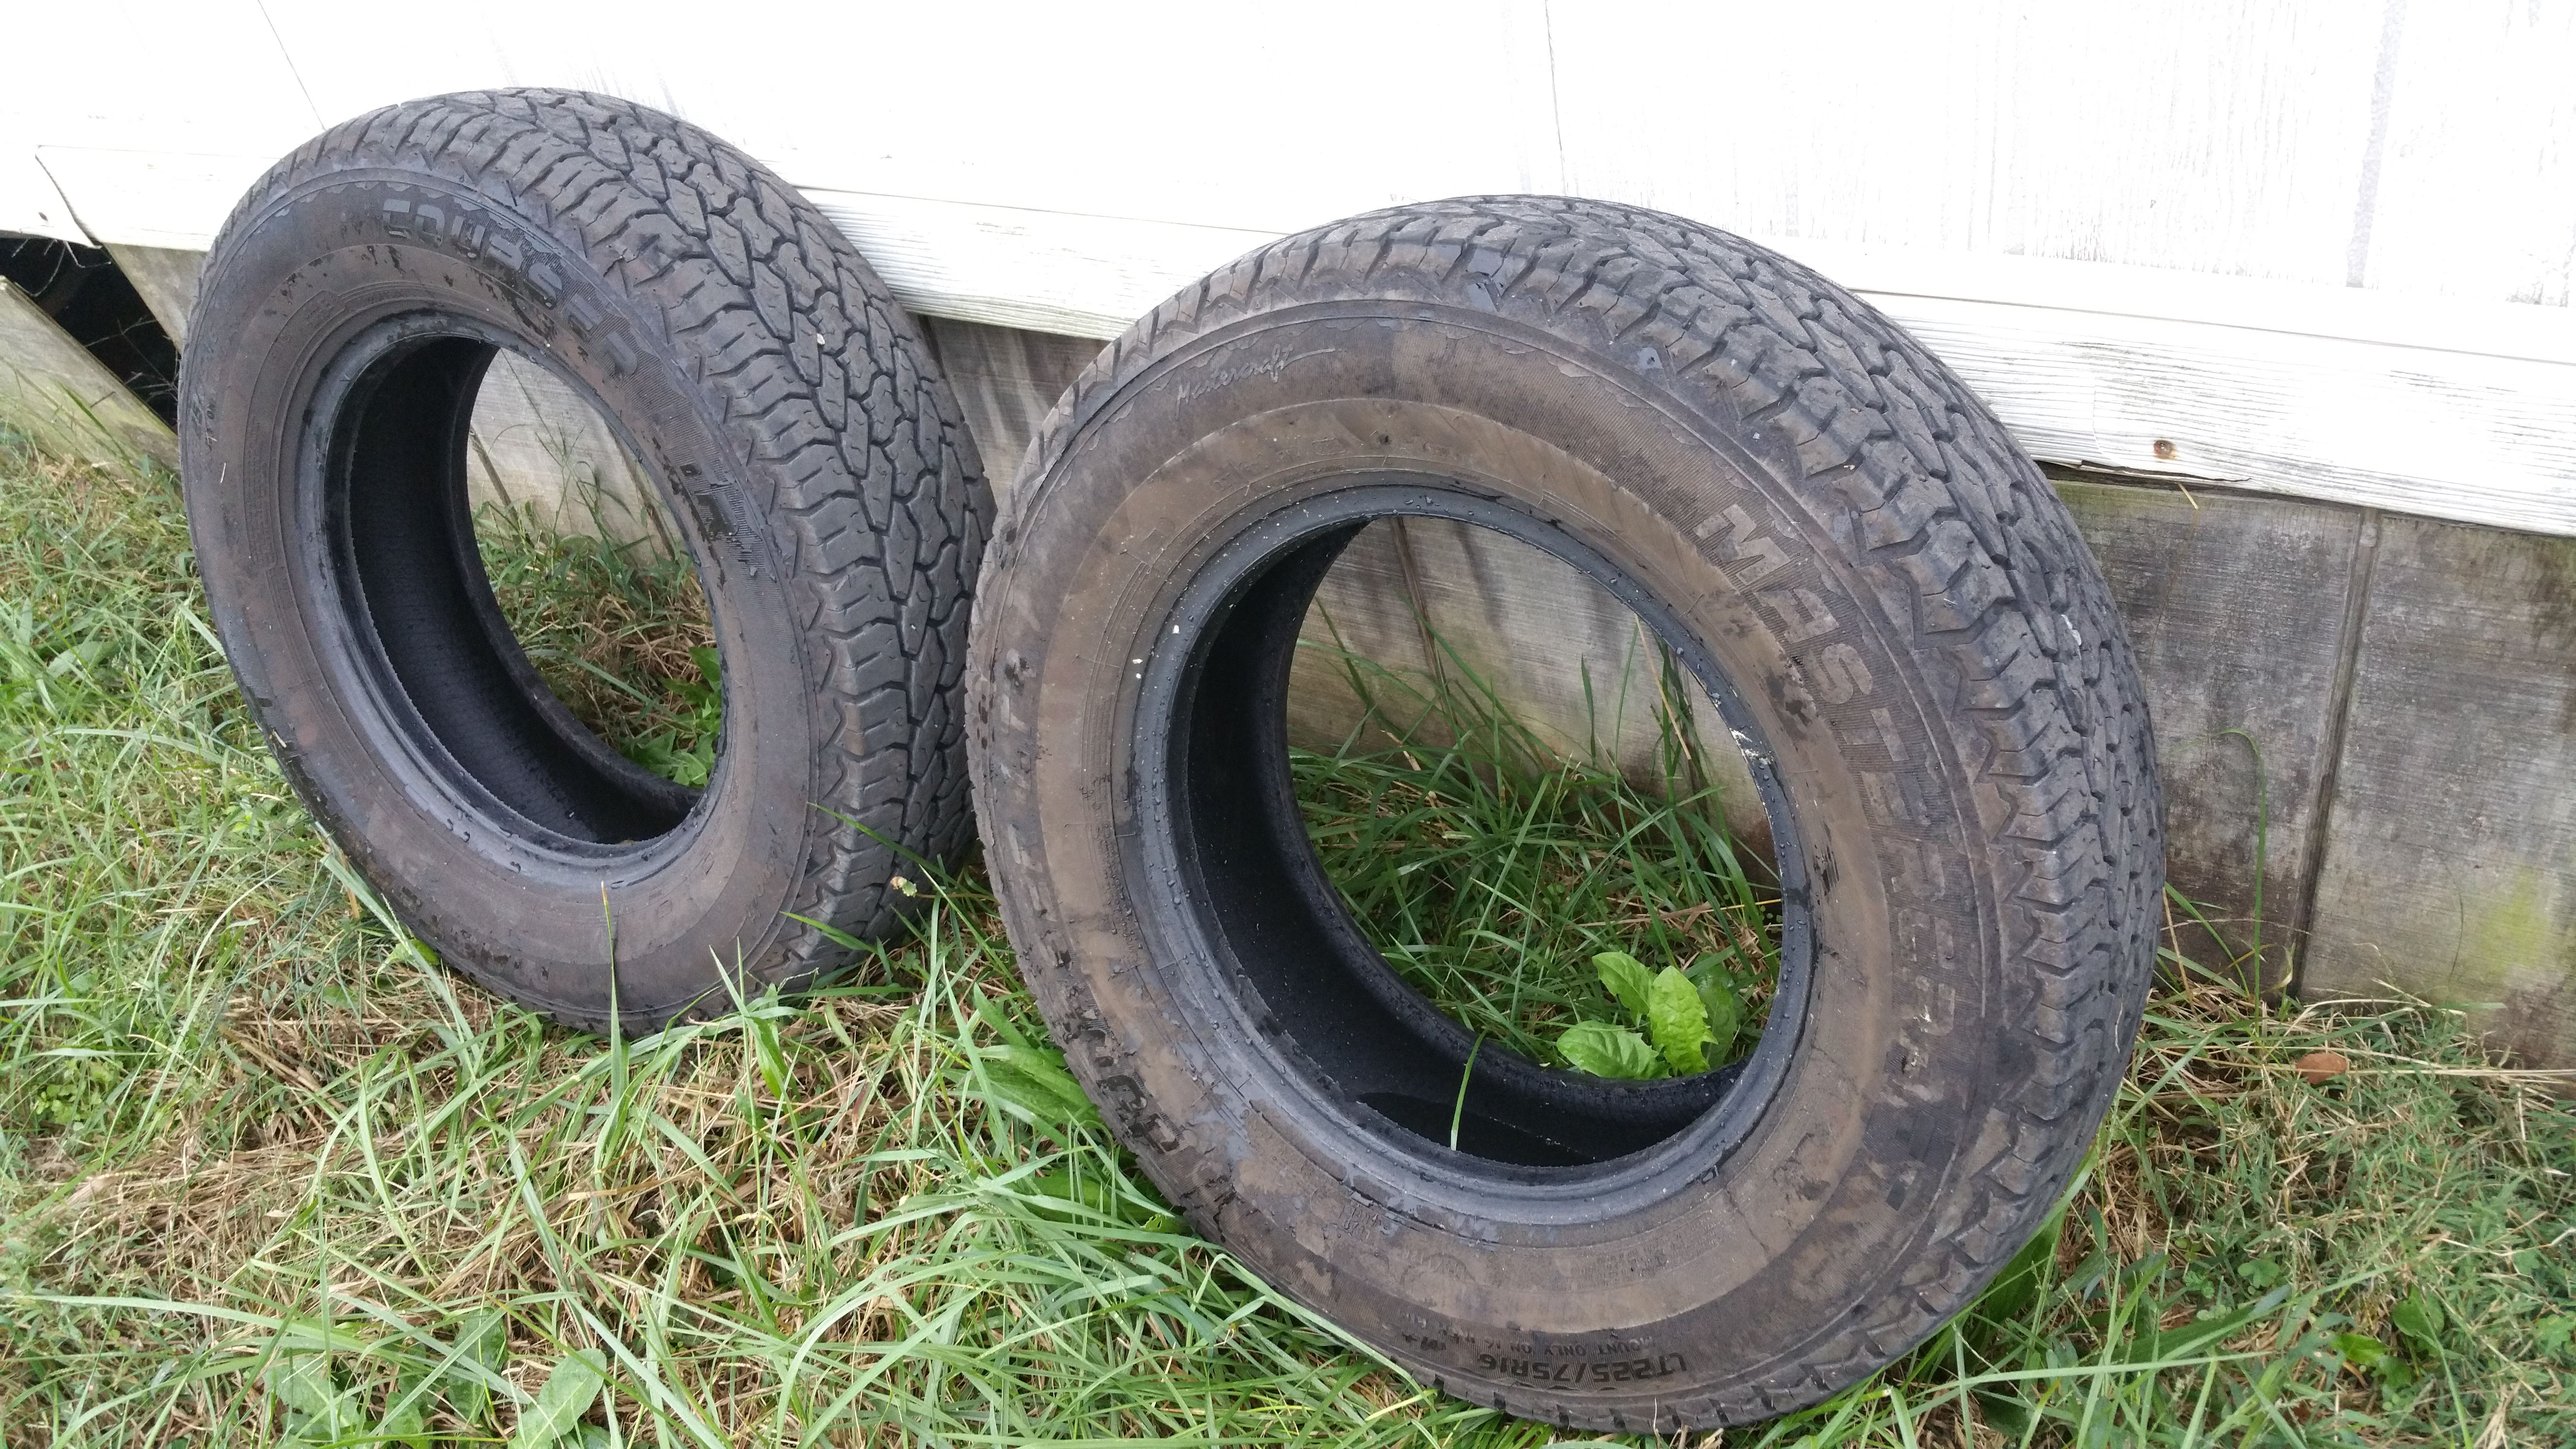 TWO GOOD USED TIRES FOR CHEAP